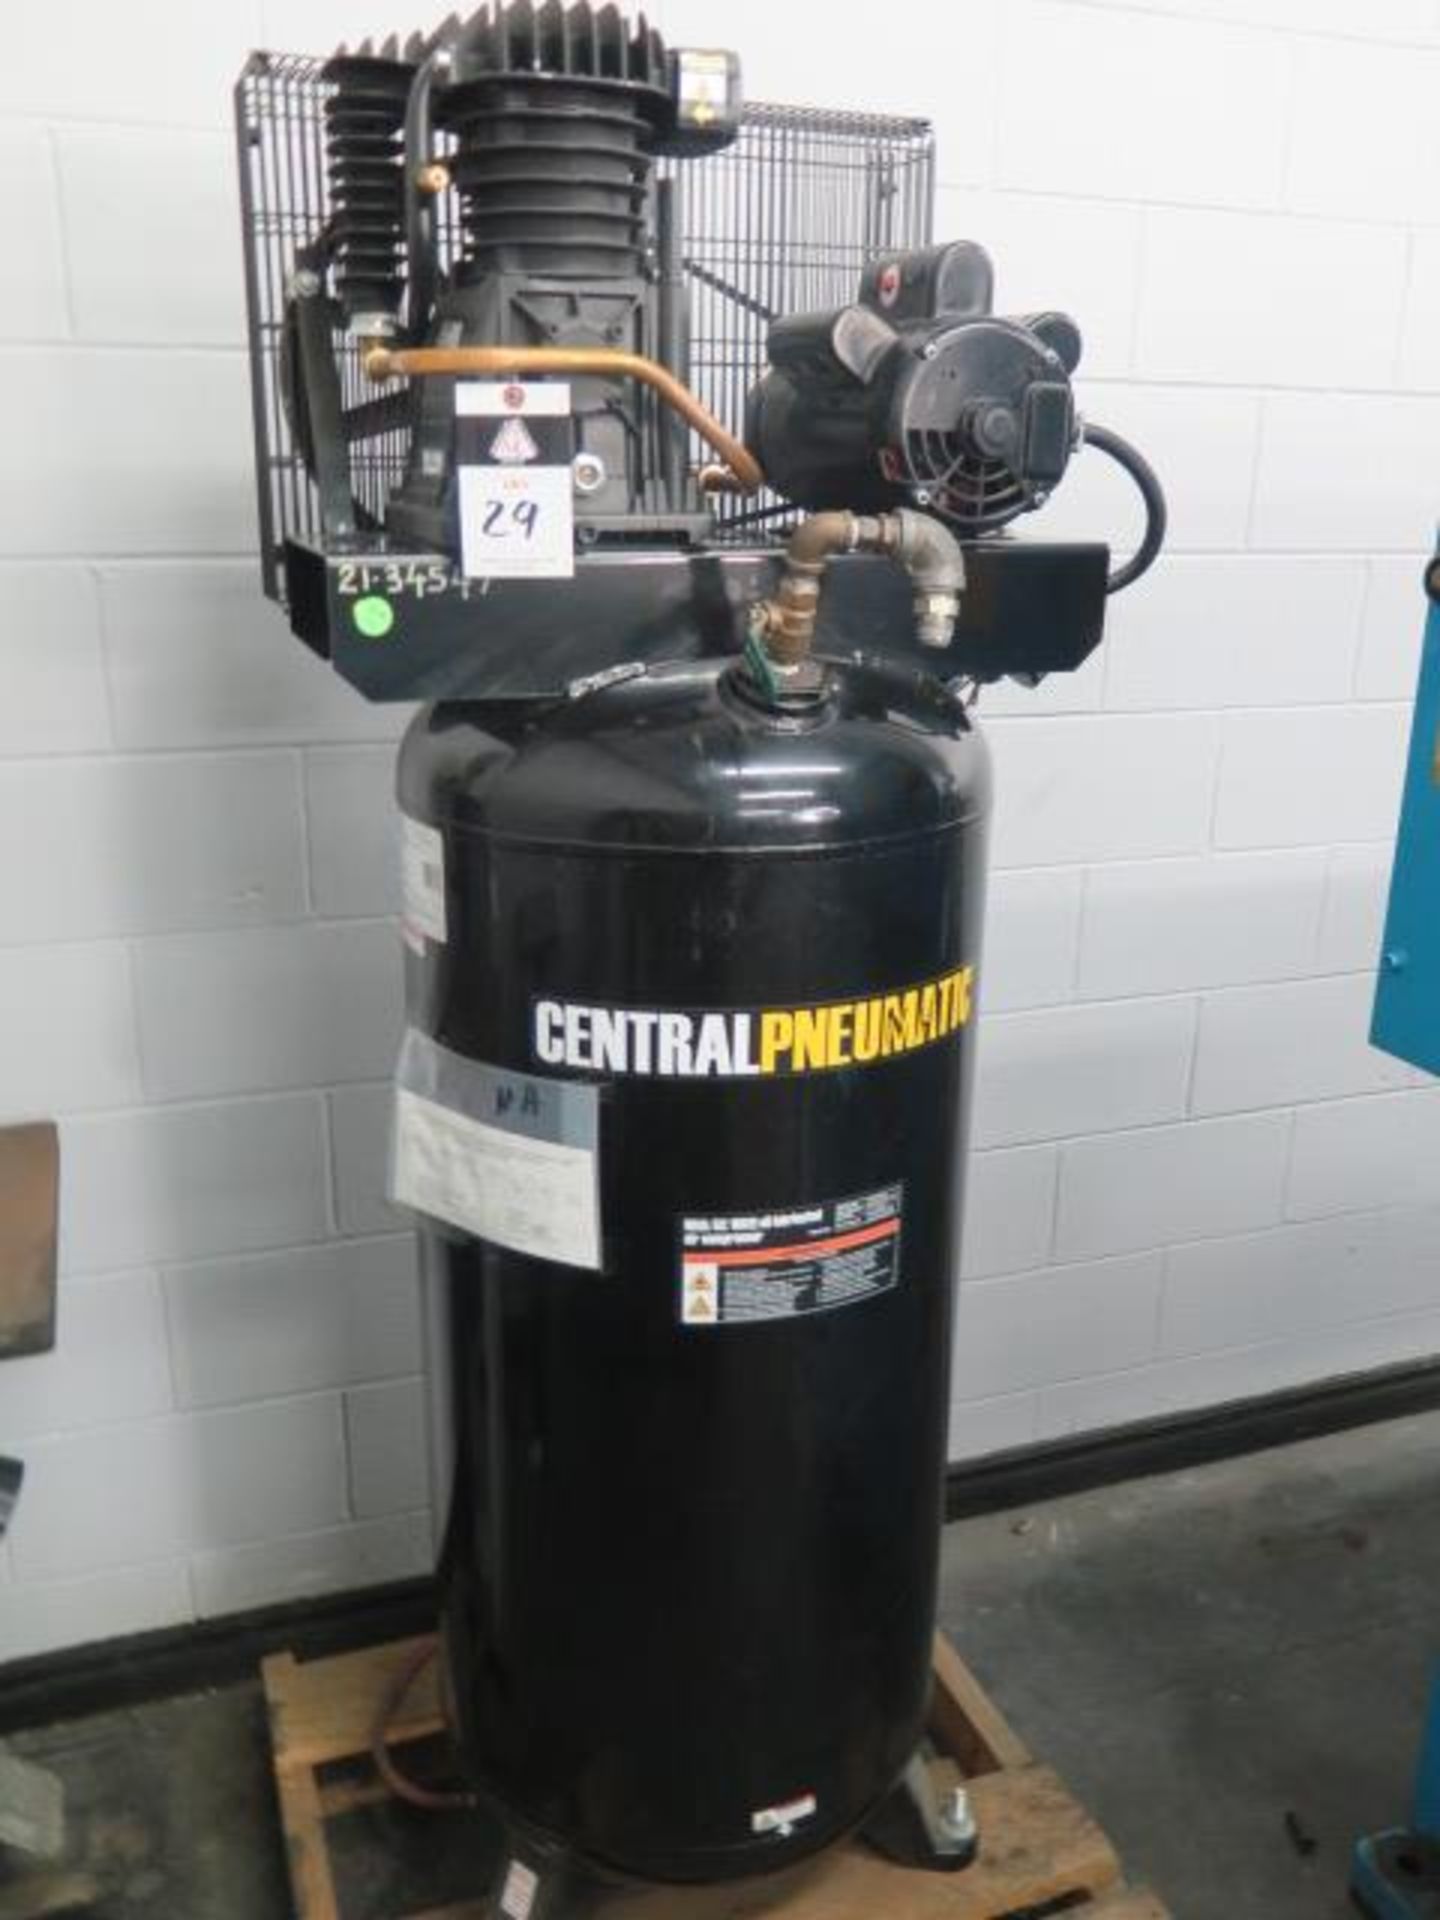 Central Pneumatic 5Hp Vertical Air Compressor w/ 60 Gallon Tank (SOLD AS-IS - NO WARRANTY) - Image 2 of 6